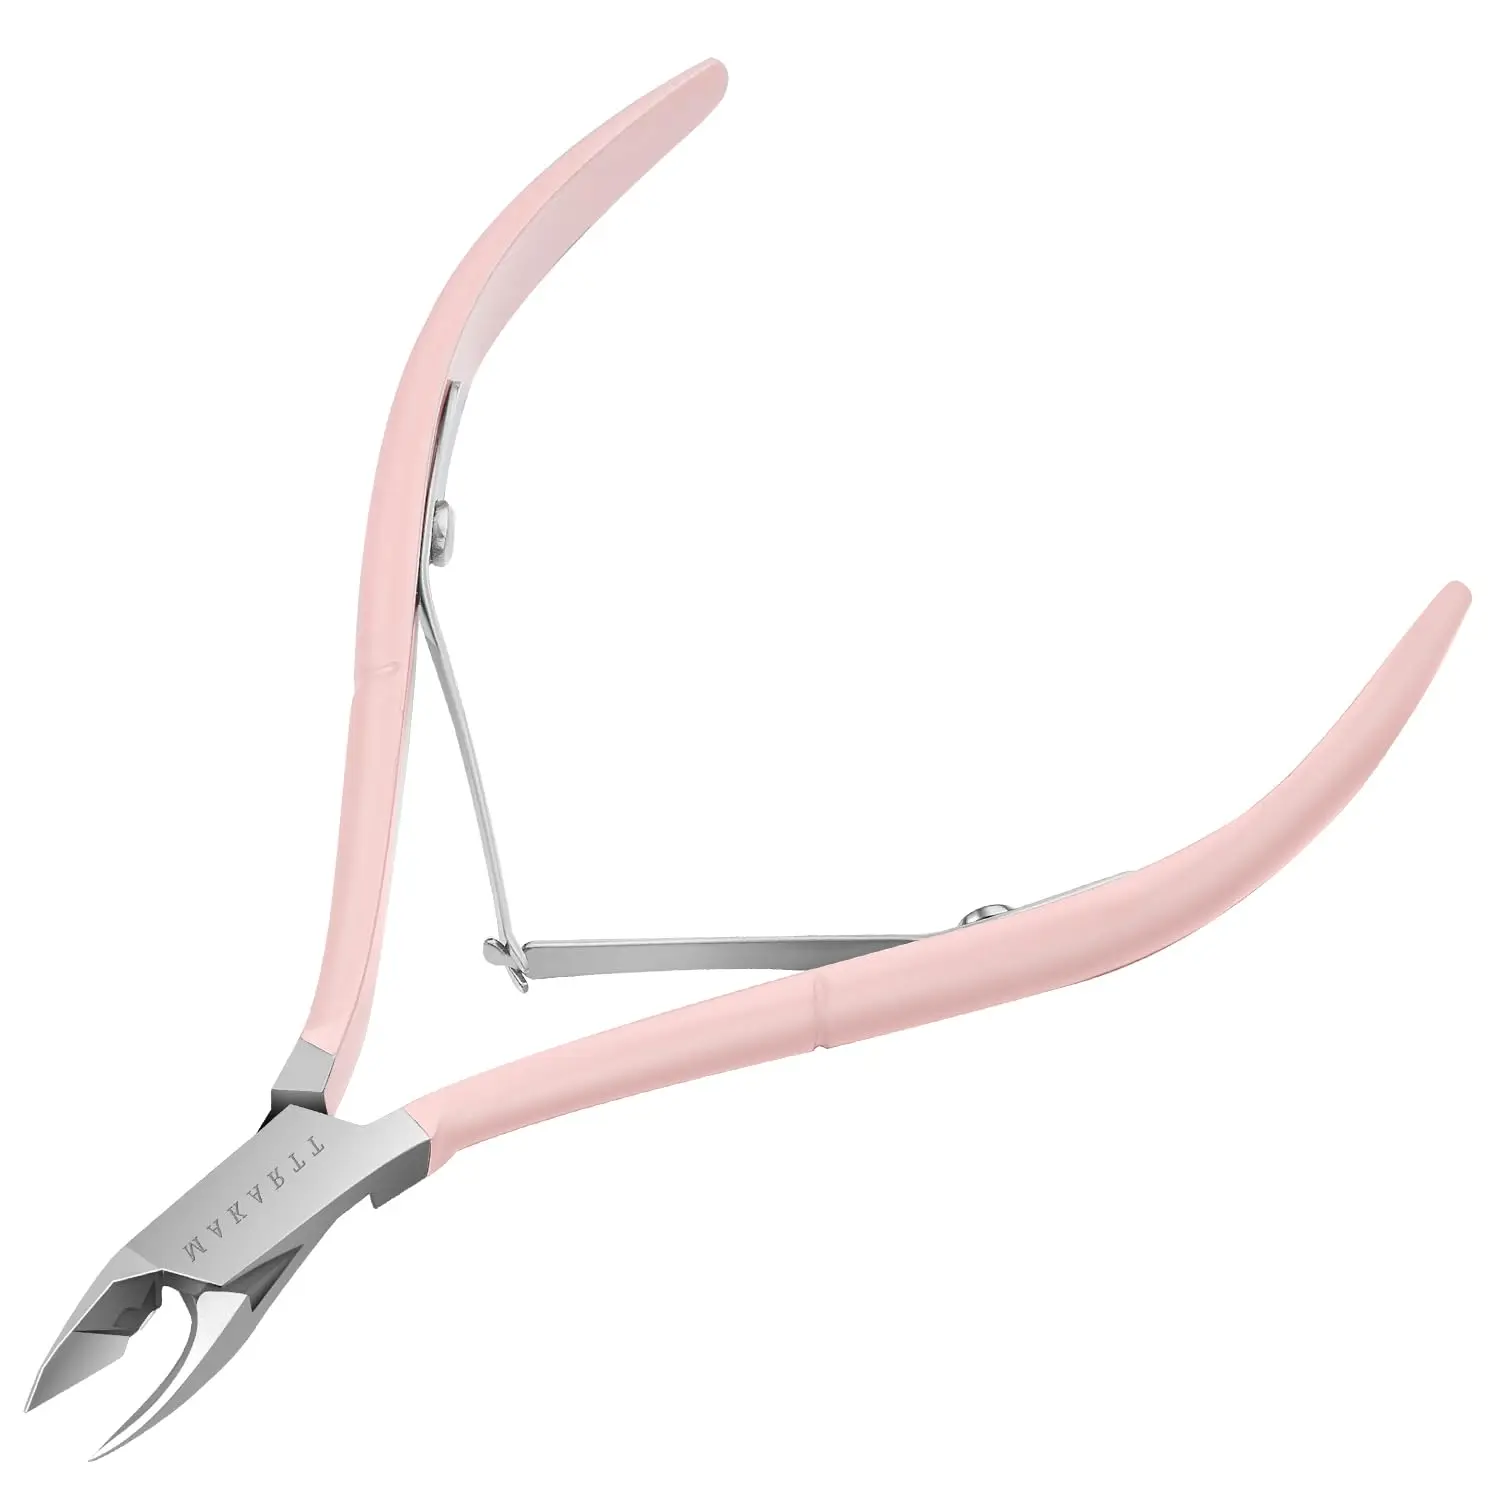 

Makartt Cuticle Nippers, Pink Cuticle Trimmer Extremely Sharp Full Jaw Cuticle Cutter Nail Care for Manicure Home Salon Use